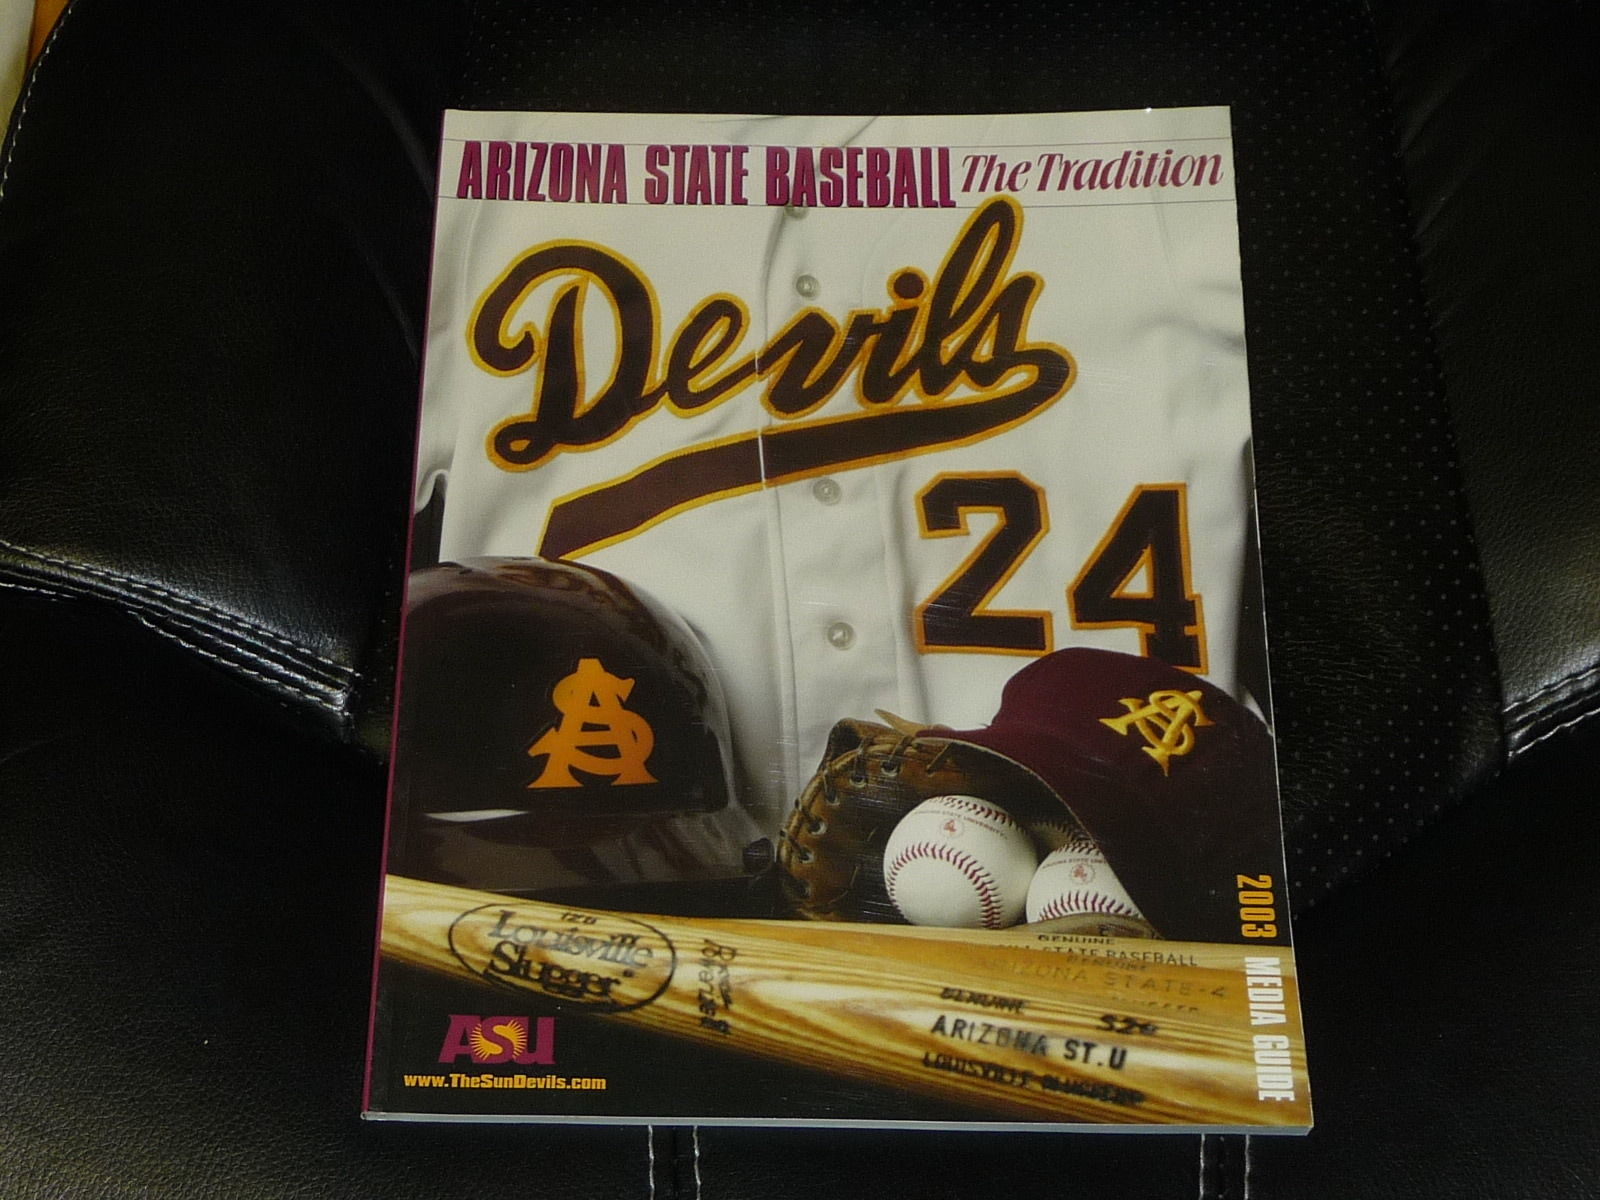 2003 ASU ARIZONA STATE COLLEGE BASEBALL MEDIA GUIDE  120 plus pages.  NR MINT